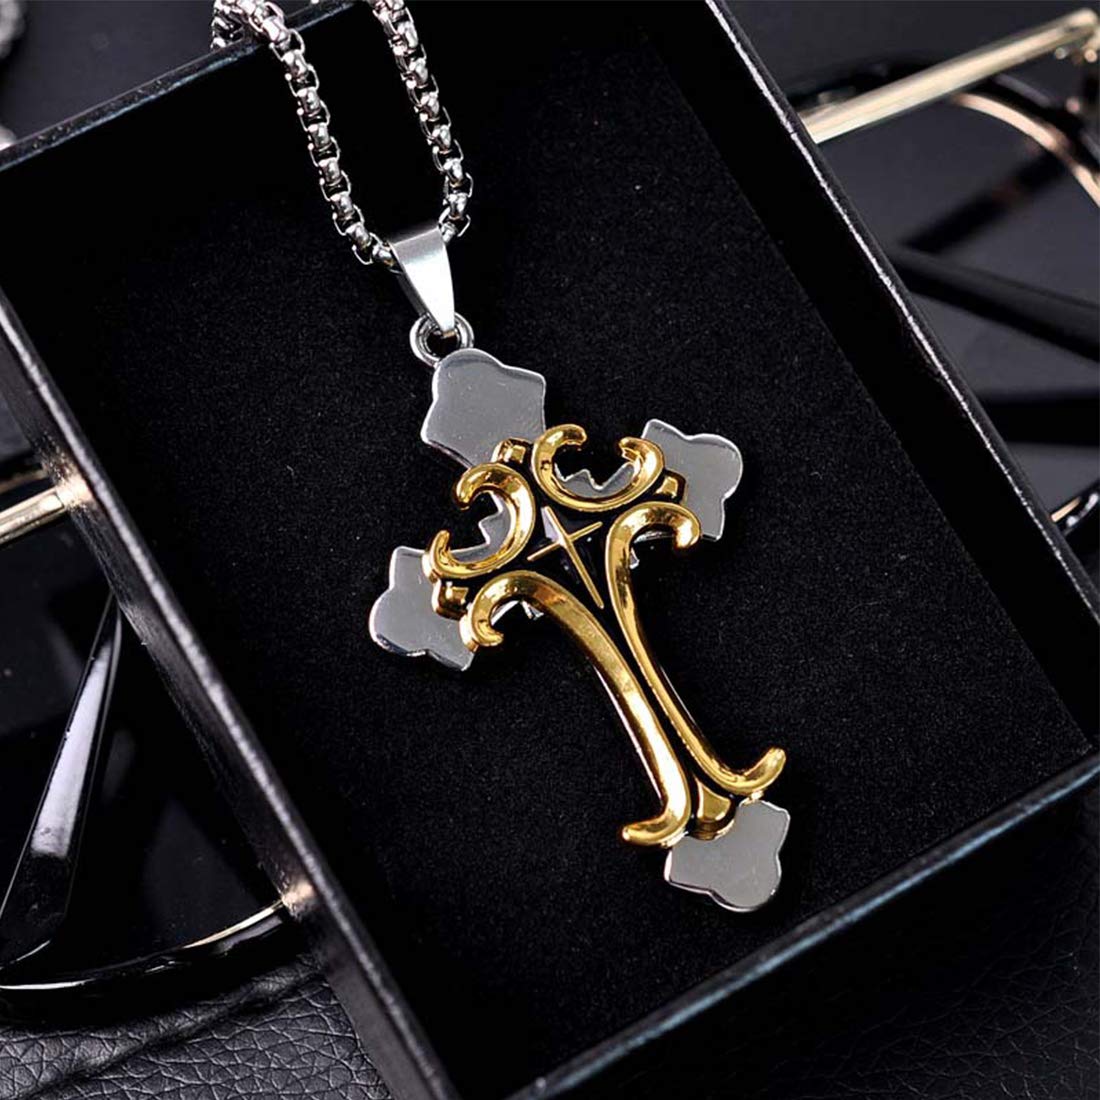 Yellow Chimes Cross Pendant for Men Chain Men Pendant Dual Tone Cross Sign Gold Polished Stainless Steel Chain Pendant for Men and Boys.